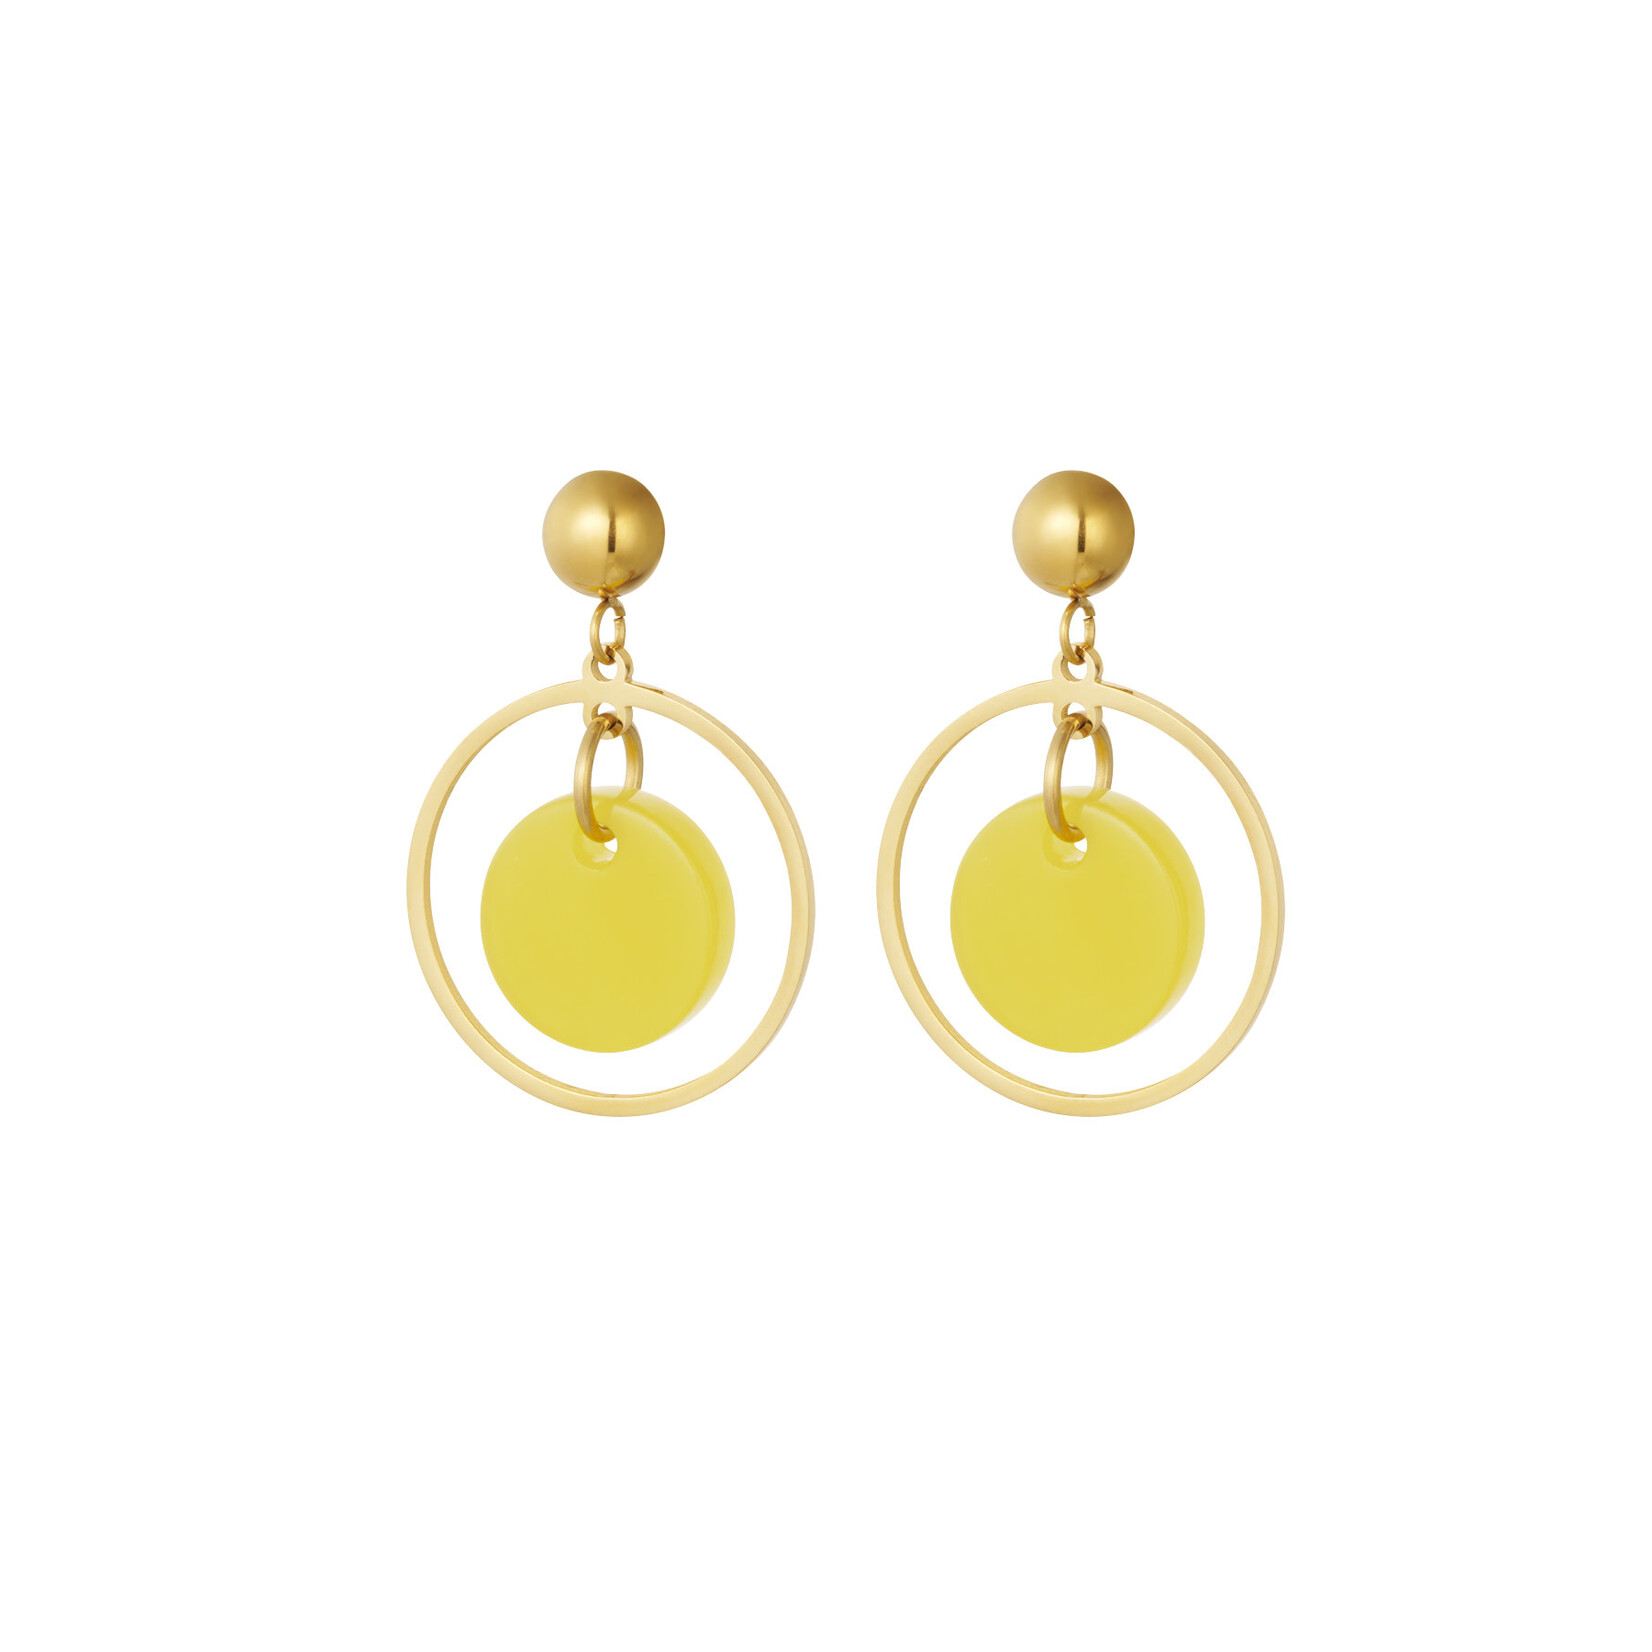 Jewelry Earrings yellow accents